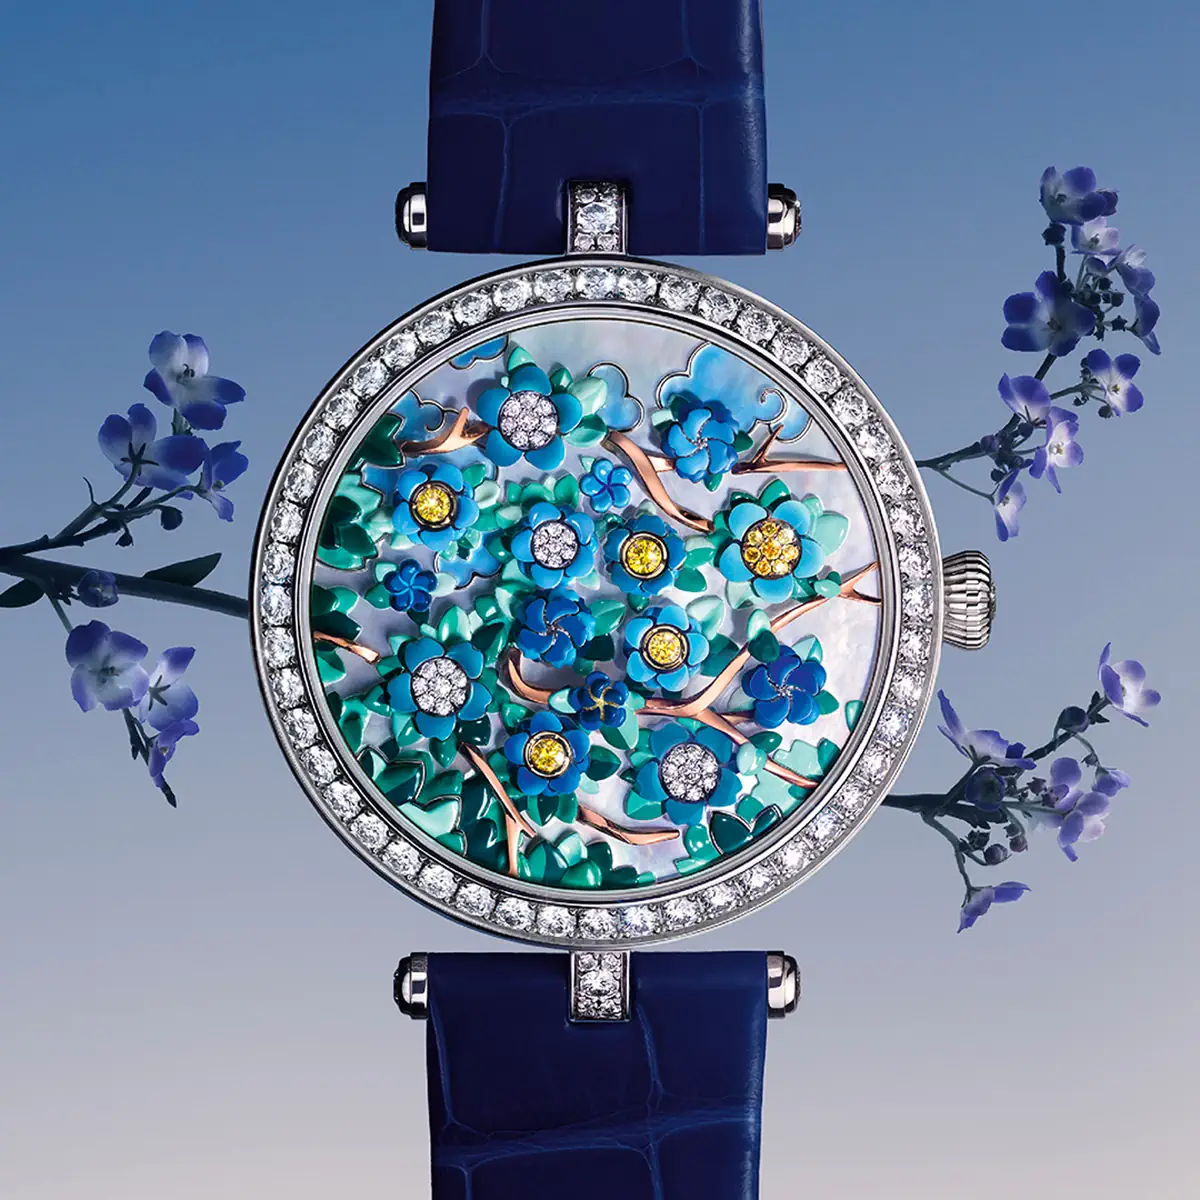 Van Cleef & Arpels unveils ''Poetry of Time'' exhibition at Cromwell Place in London